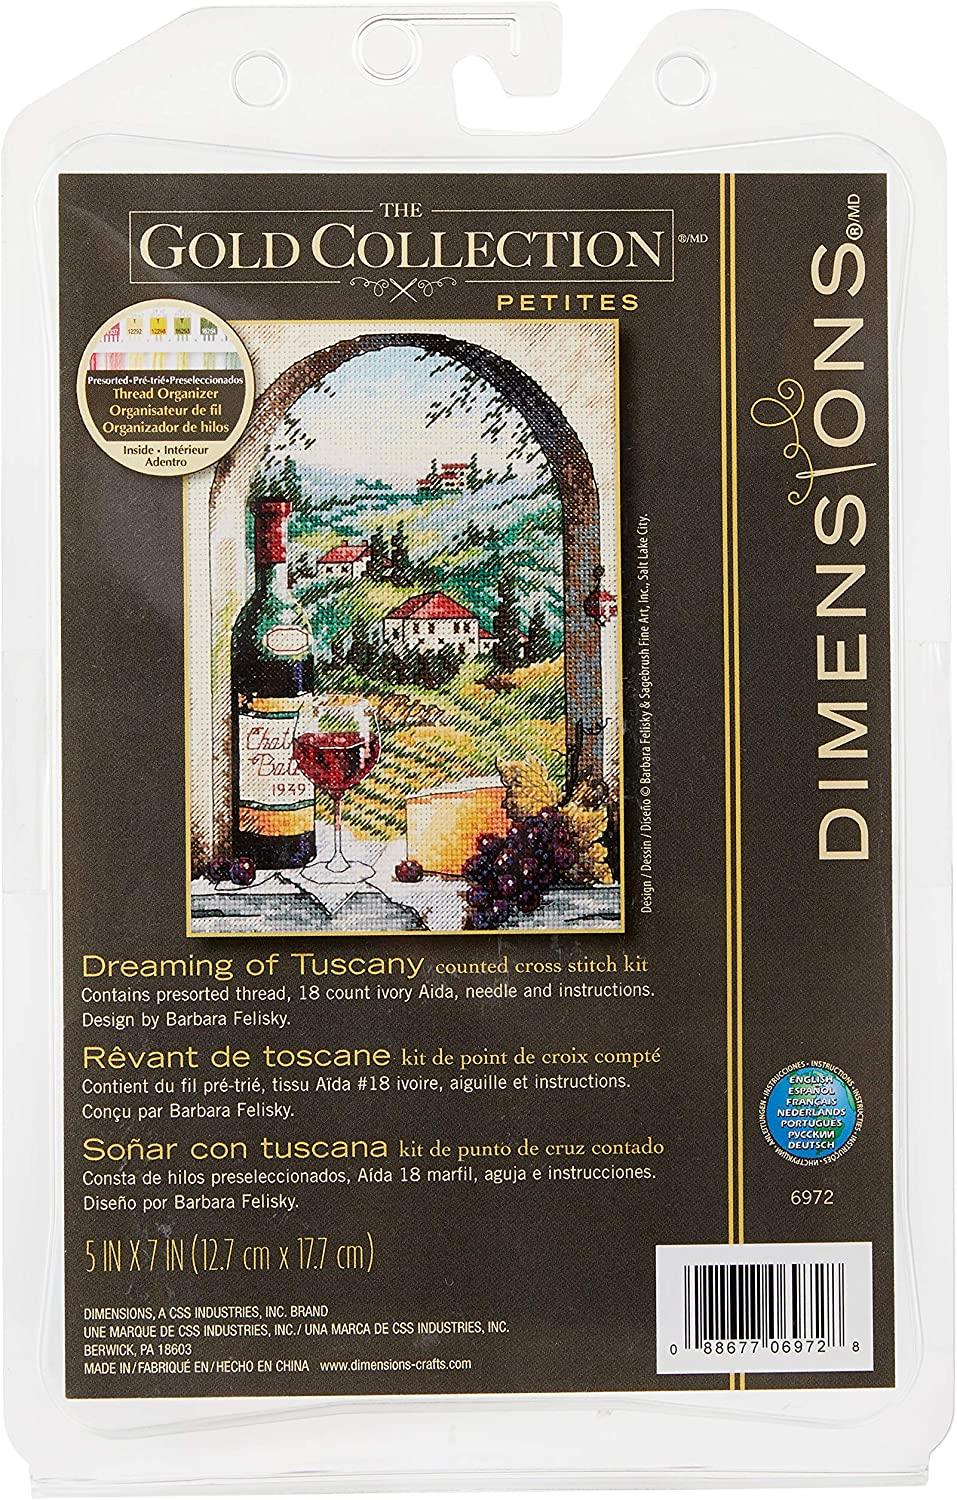 DREAMING OF TUSCANY, Counted Cross Stitch Kit, 18 count ivory Aida, DIMENSIONS (06972) - Leo Hobby